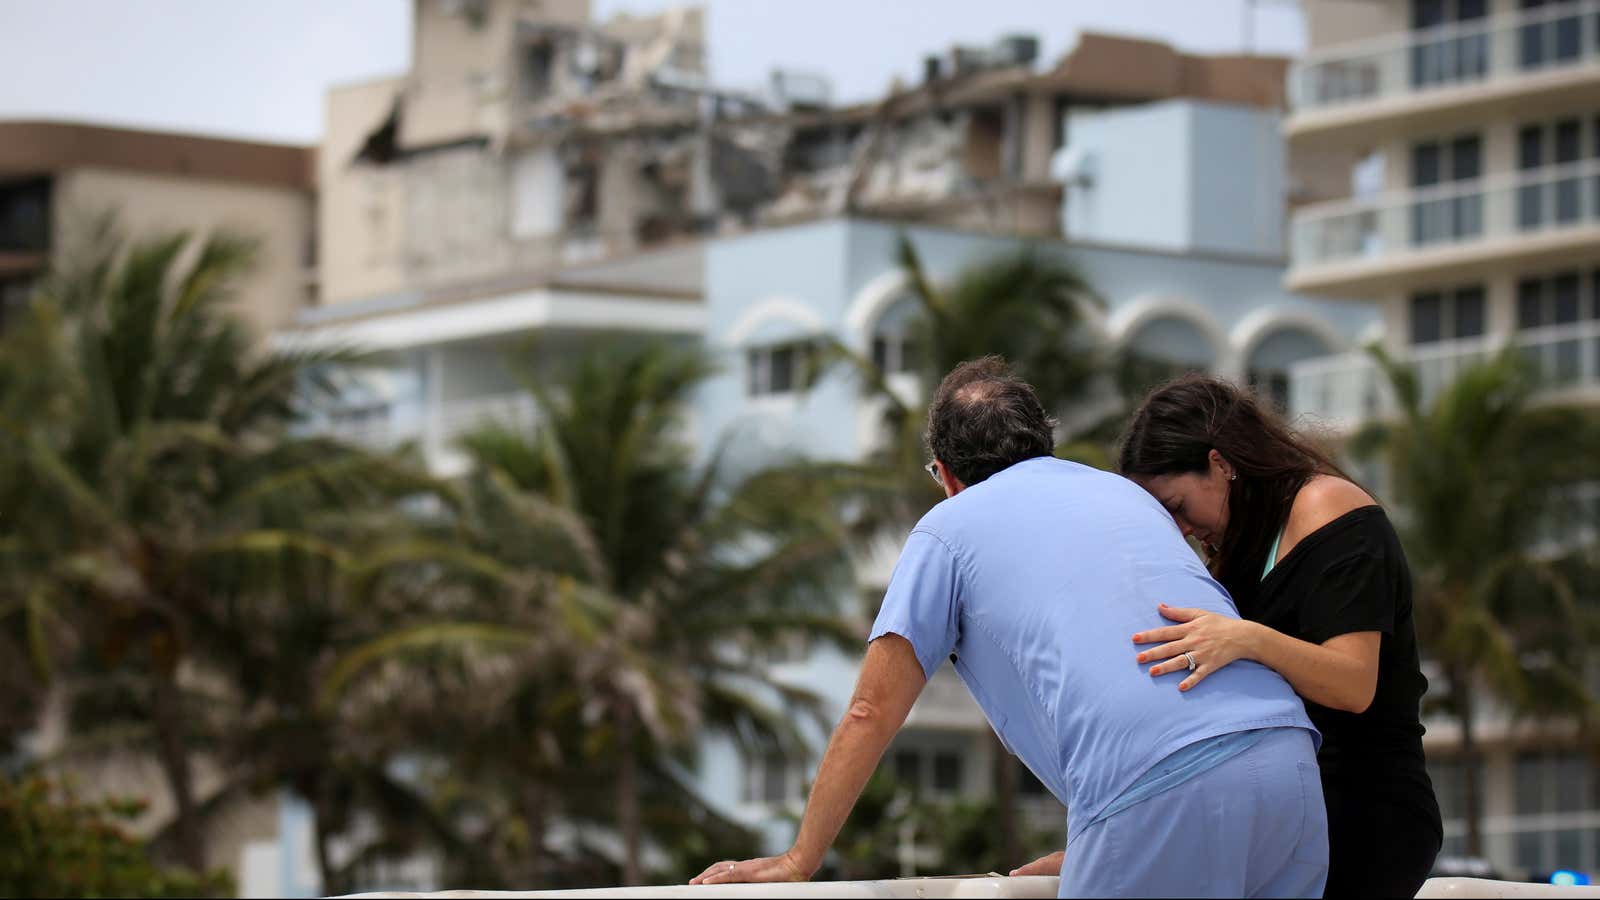 A couple react near the partially collapsed residential building in Surfside, Florida.